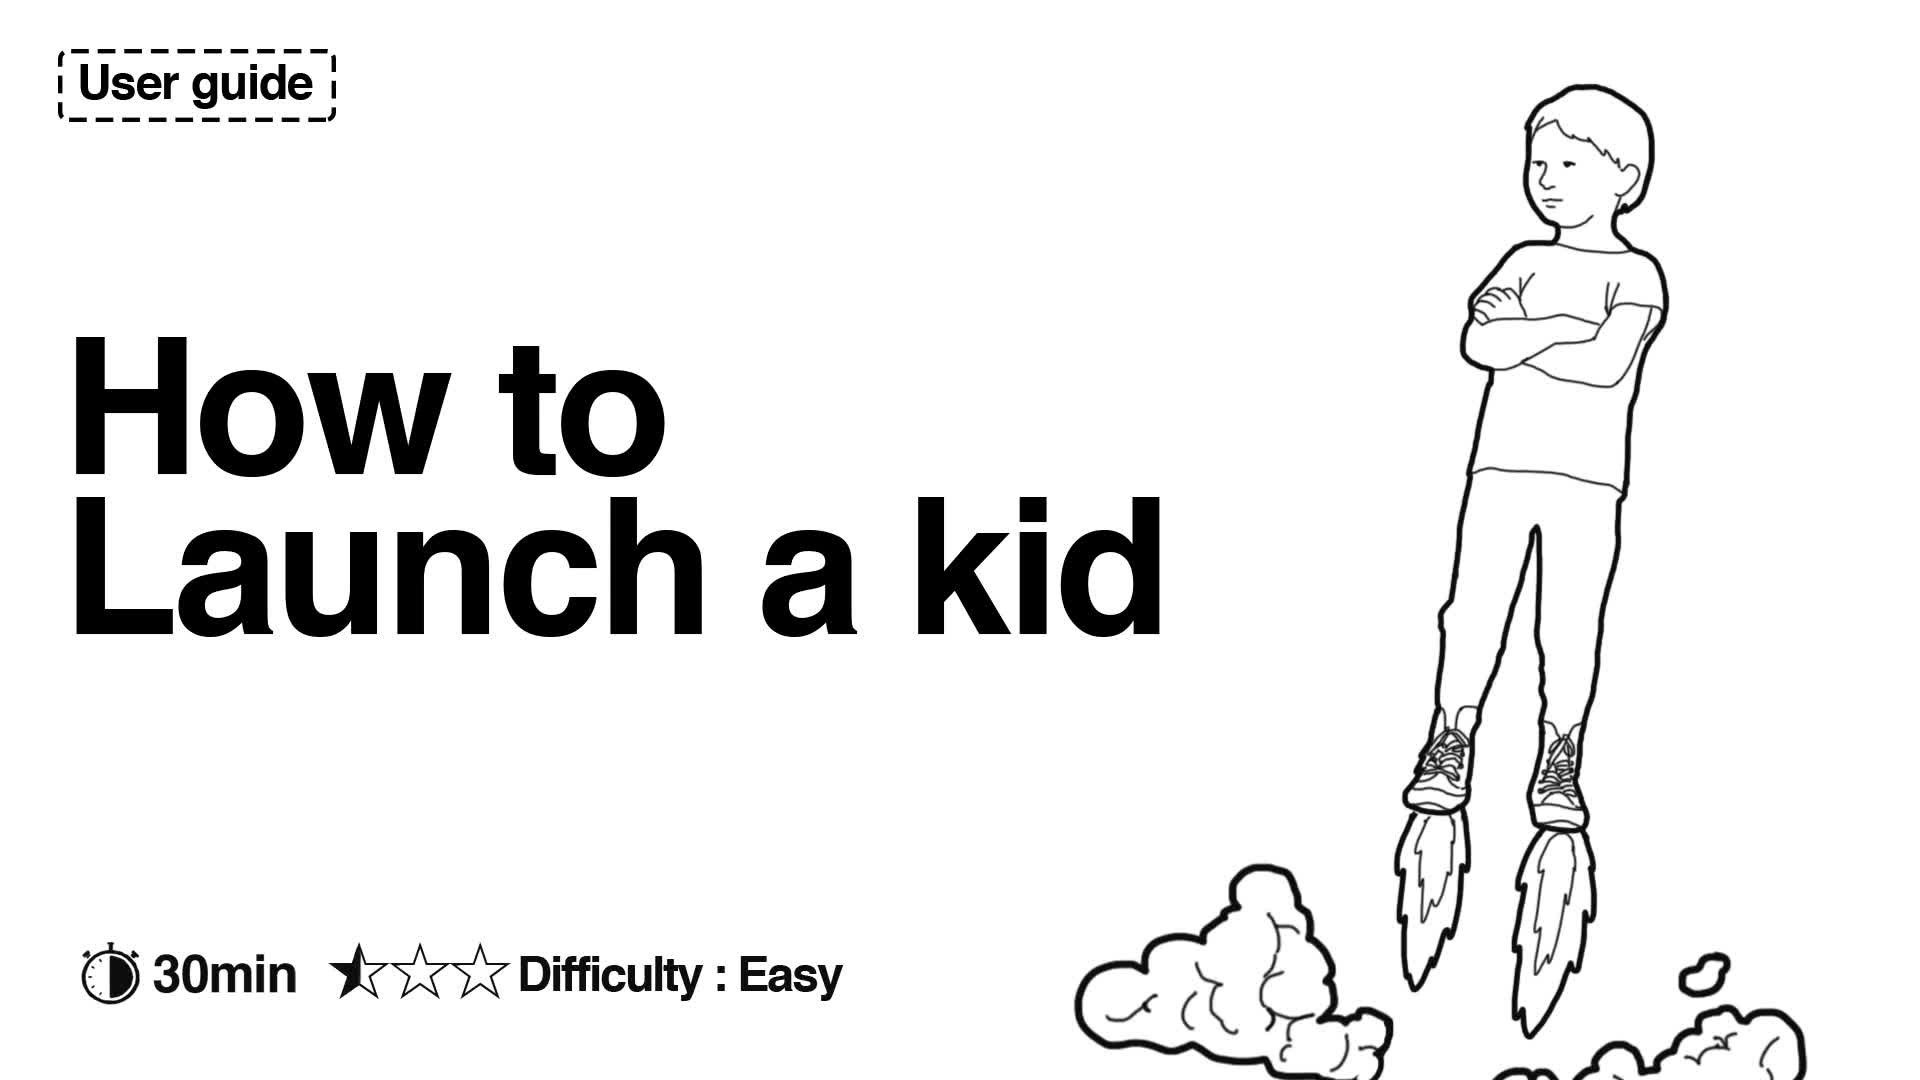 How to Launch a Kid